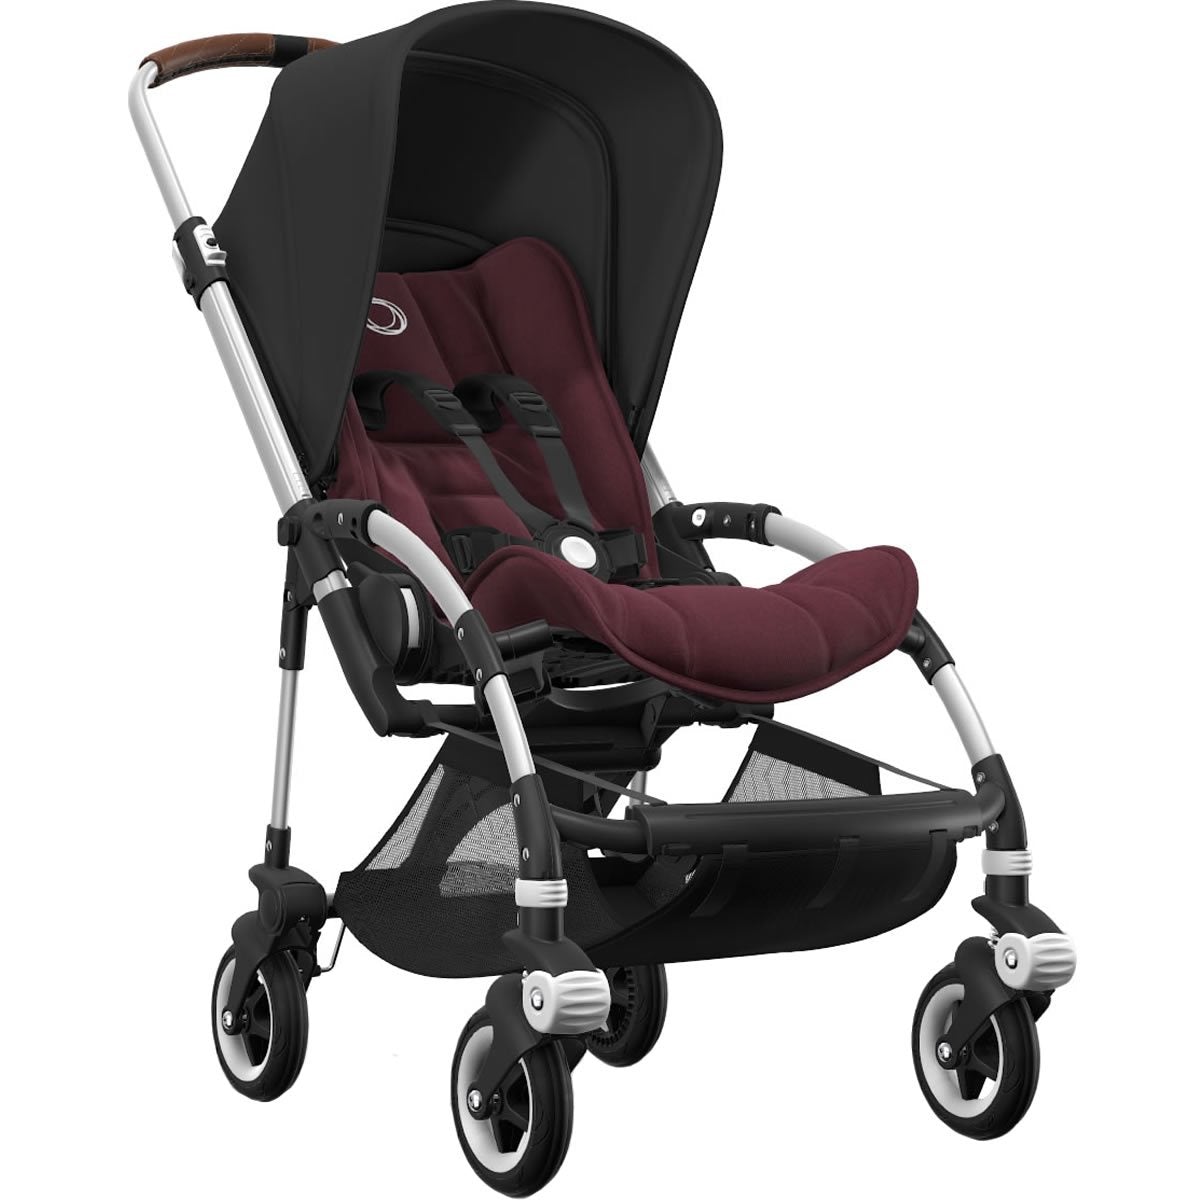 Bugaboo Bee 5 Stroller Seat Fabric Red Melange - ANB Baby -$50 - $75